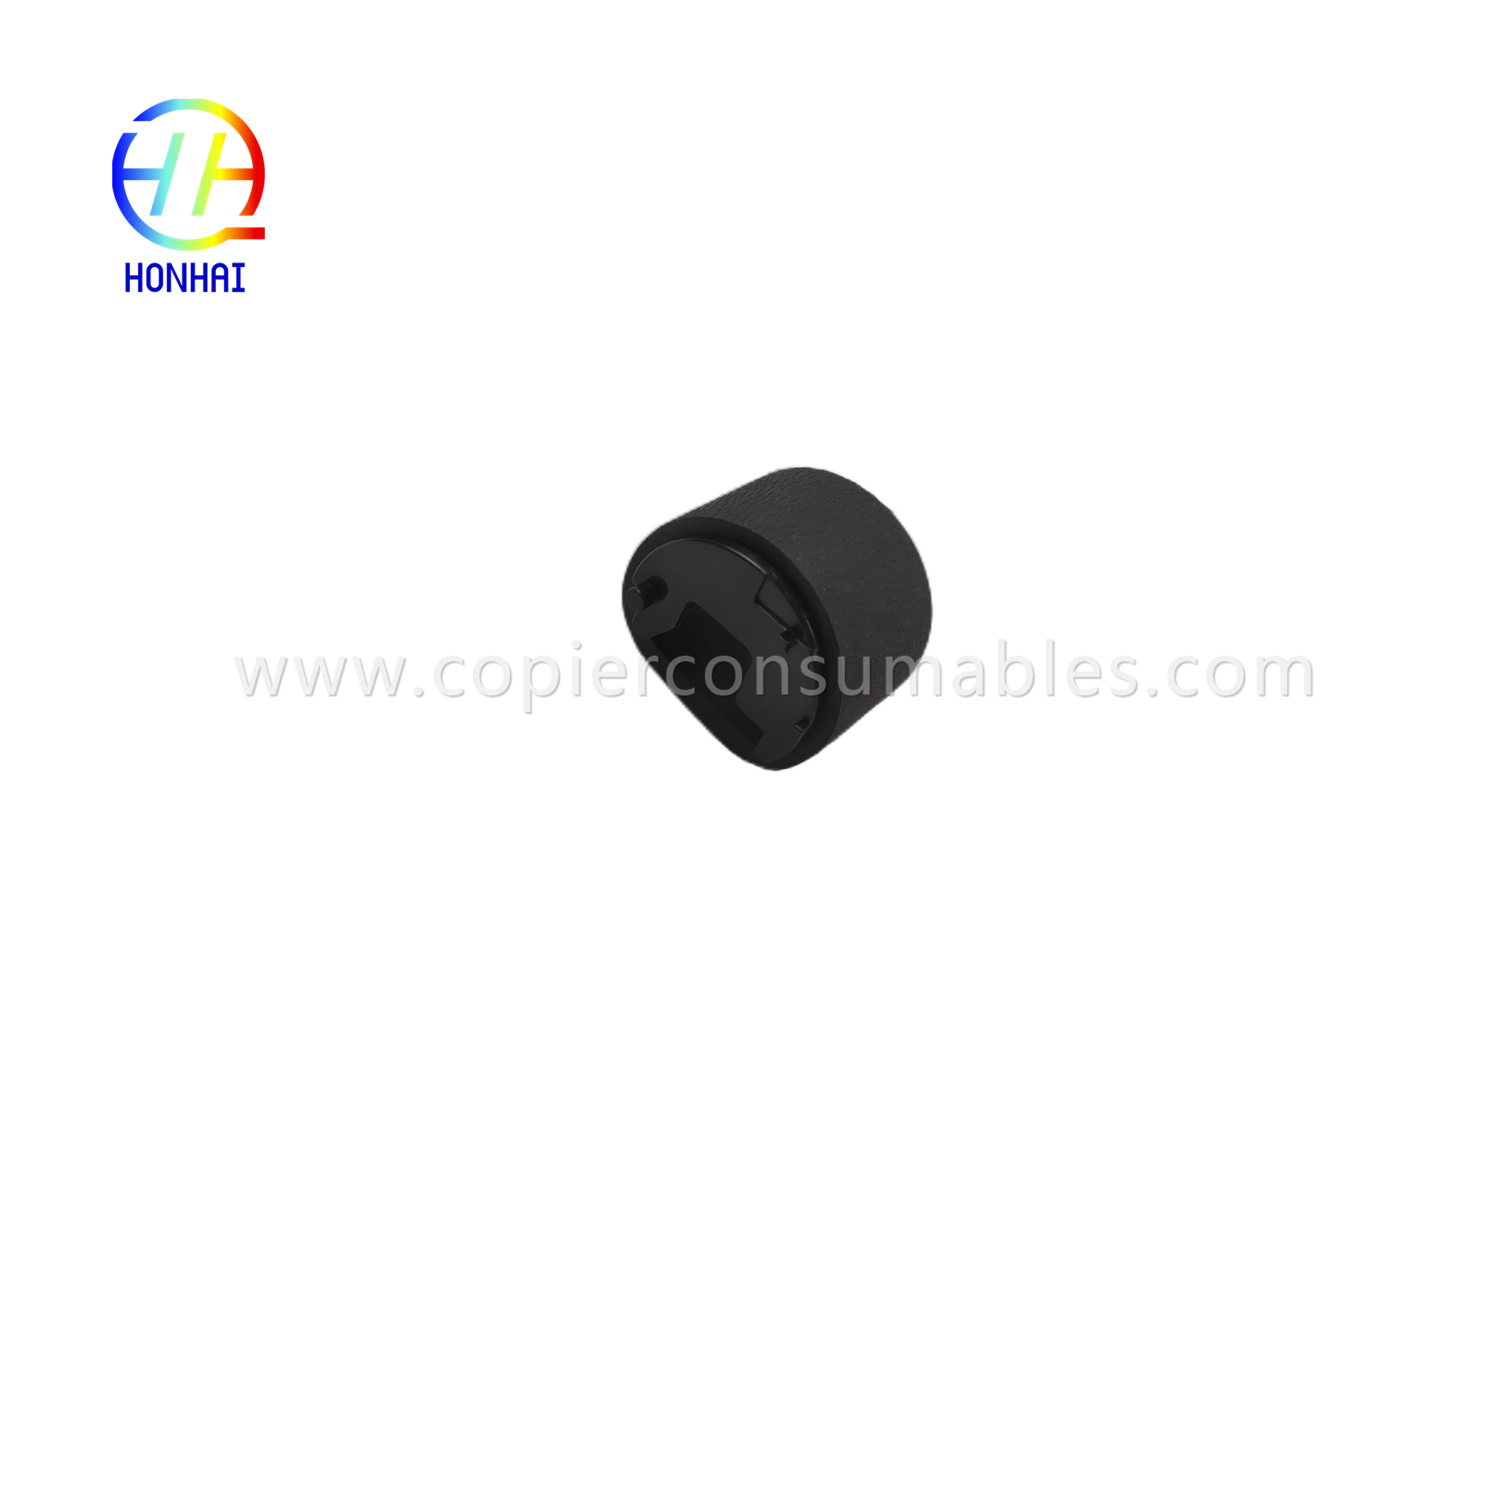 https://www.copierconsumables.com/bypass-manual-pickup-roller-for-hp-laserjet-p2035-p2035n-p2055d-p2055dn-p2055x-rl1-2120-000-pickup-roller-product/